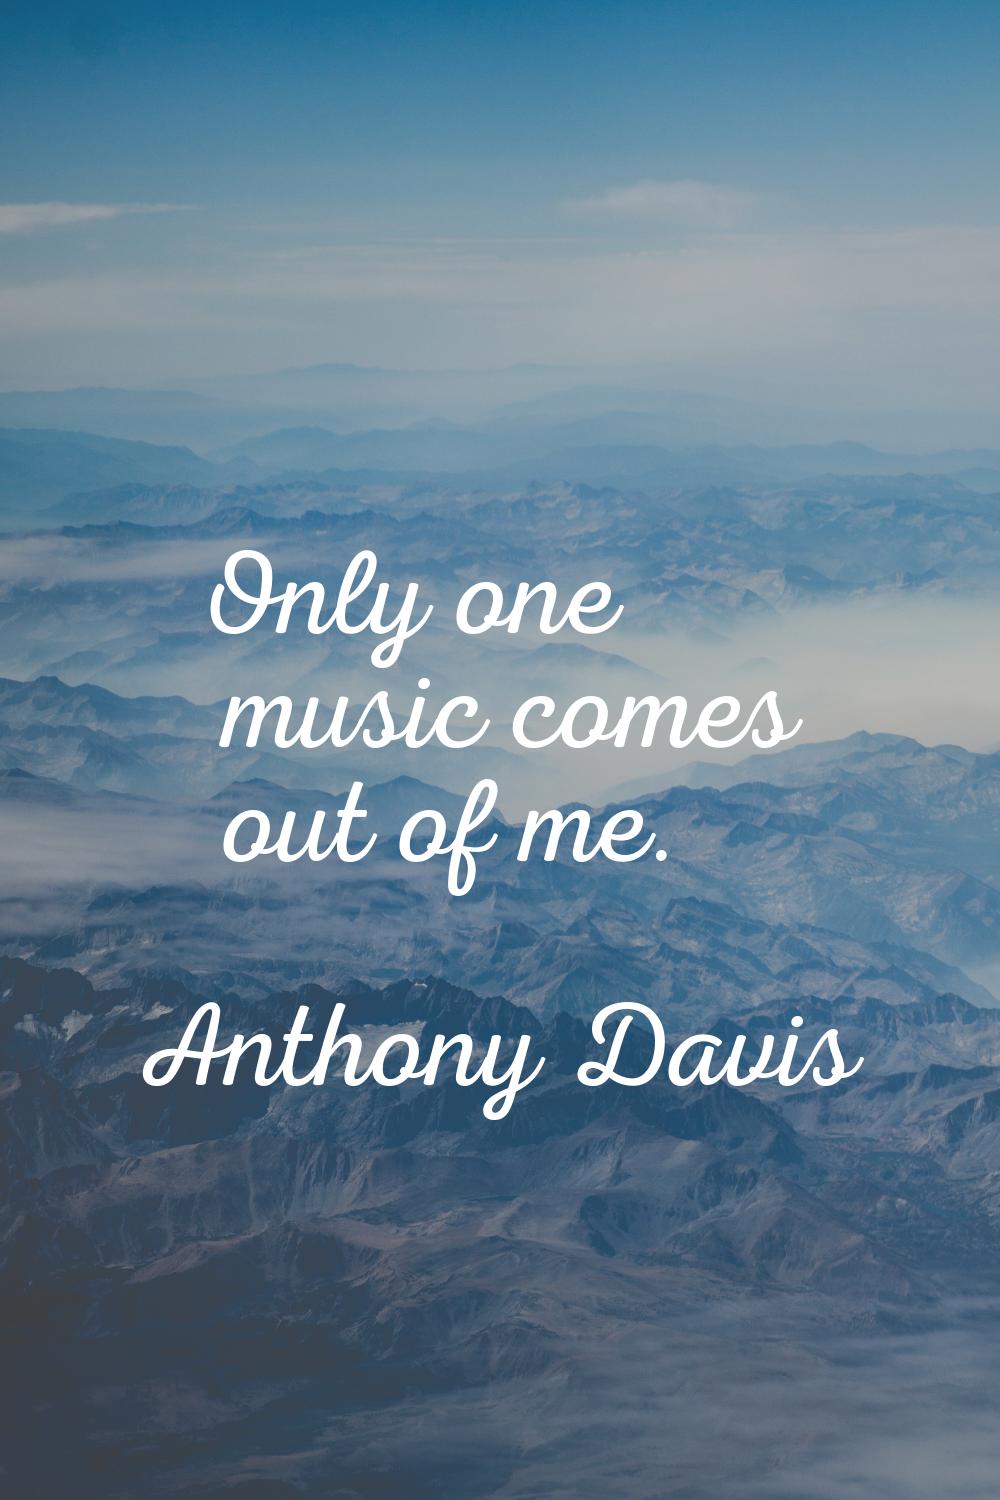 Only one music comes out of me.